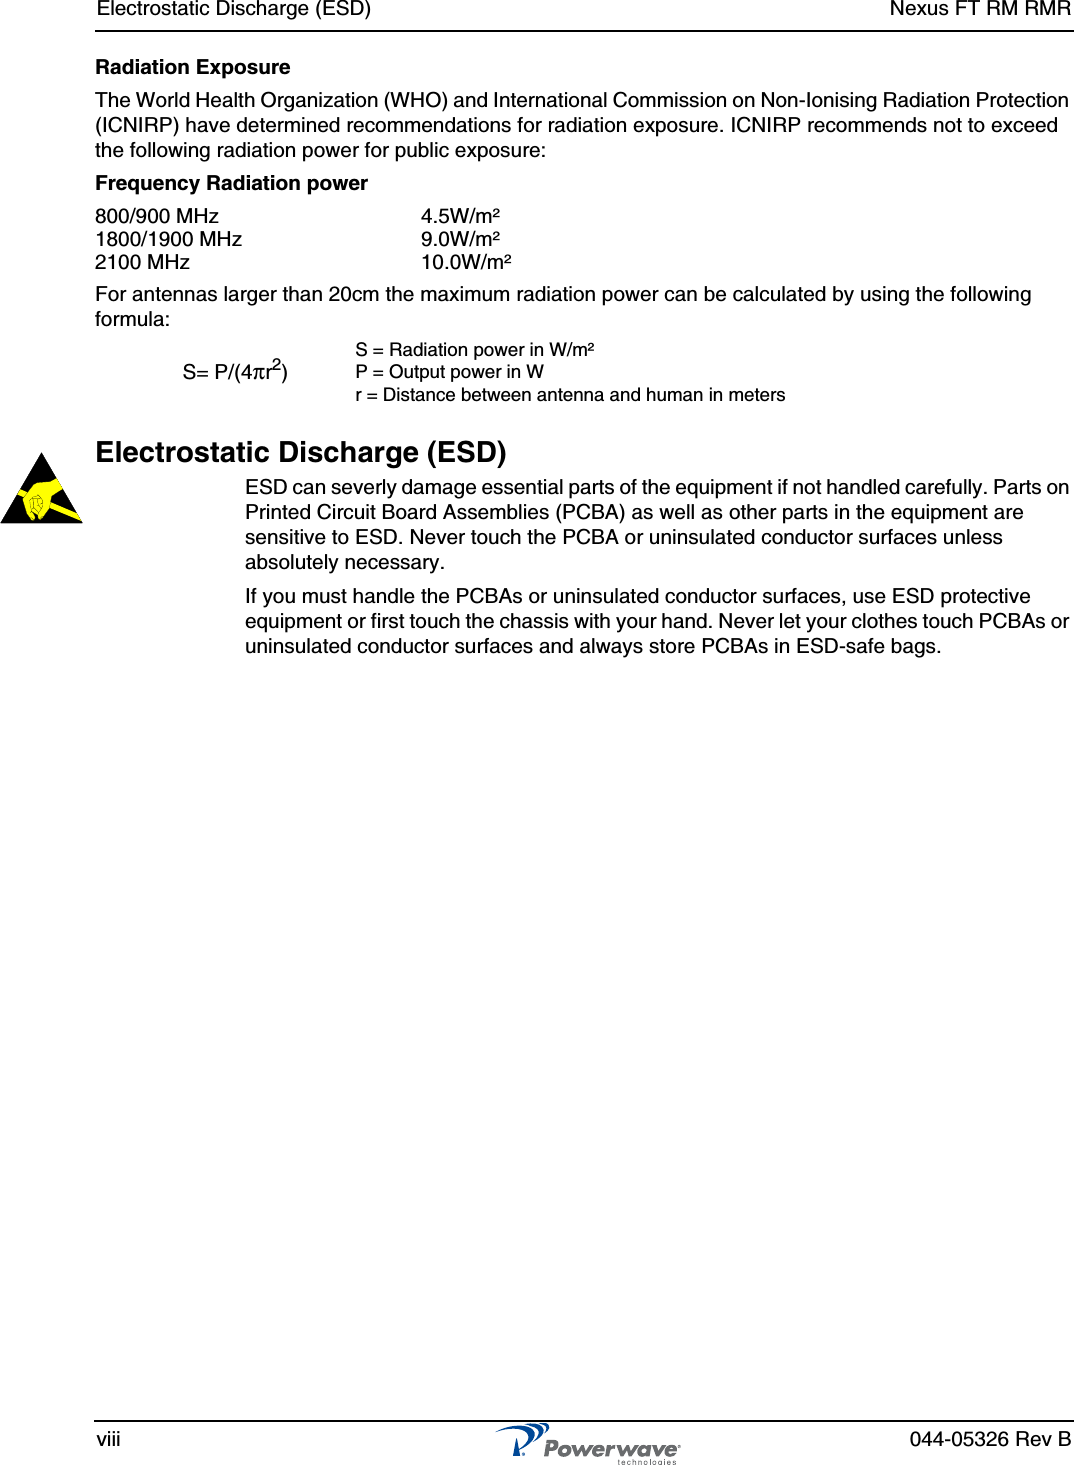 Electrostatic Discharge (ESD) Nexus FT RM RMRviii 044-05326 Rev BRadiation ExposureThe World Health Organization (WHO) and International Commission on Non-Ionising Radiation Protection (ICNIRP) have determined recommendations for radiation exposure. ICNIRP recommends not to exceed the following radiation power for public exposure:Frequency Radiation power800/900 MHz 4.5W/m²1800/1900 MHz 9.0W/m²2100 MHz 10.0W/m²For antennas larger than 20cm the maximum radiation power can be calculated by using the following formula:Electrostatic Discharge (ESD)ESD can severly damage essential parts of the equipment if not handled carefully. Parts on Printed Circuit Board Assemblies (PCBA) as well as other parts in the equipment are sensitive to ESD. Never touch the PCBA or uninsulated conductor surfaces unless absolutely necessary.If you must handle the PCBAs or uninsulated conductor surfaces, use ESD protective equipment or first touch the chassis with your hand. Never let your clothes touch PCBAs or uninsulated conductor surfaces and always store PCBAs in ESD-safe bags.S= P/(4πr2)S = Radiation power in W/m²P = Output power in Wr = Distance between antenna and human in meters